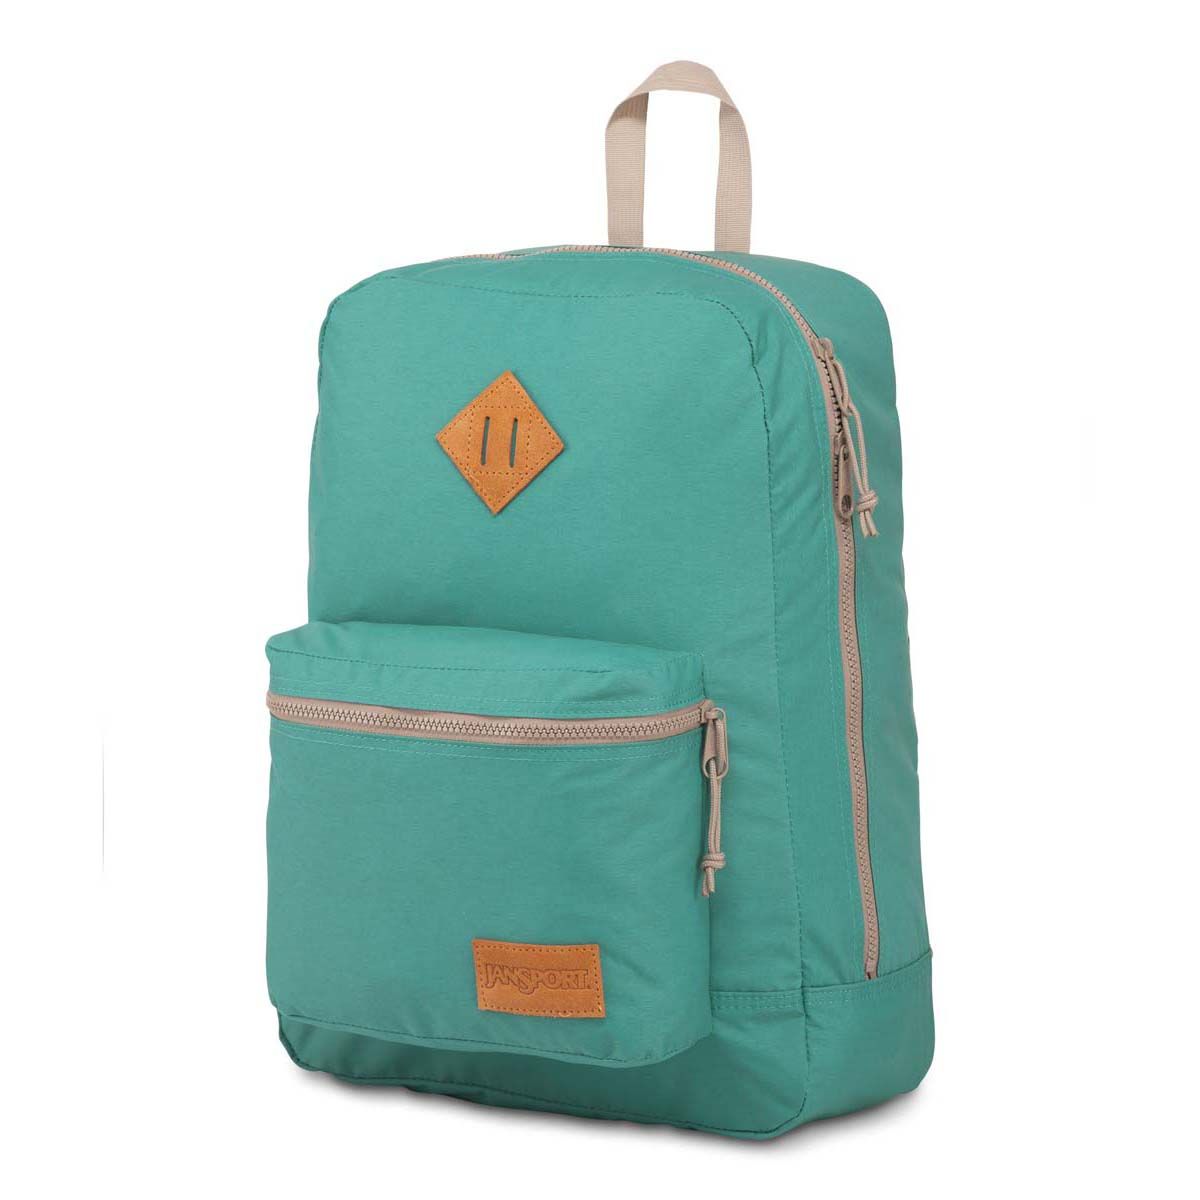 JanSport Super Lite Backpack in Classic Teal/Oyster | NEON